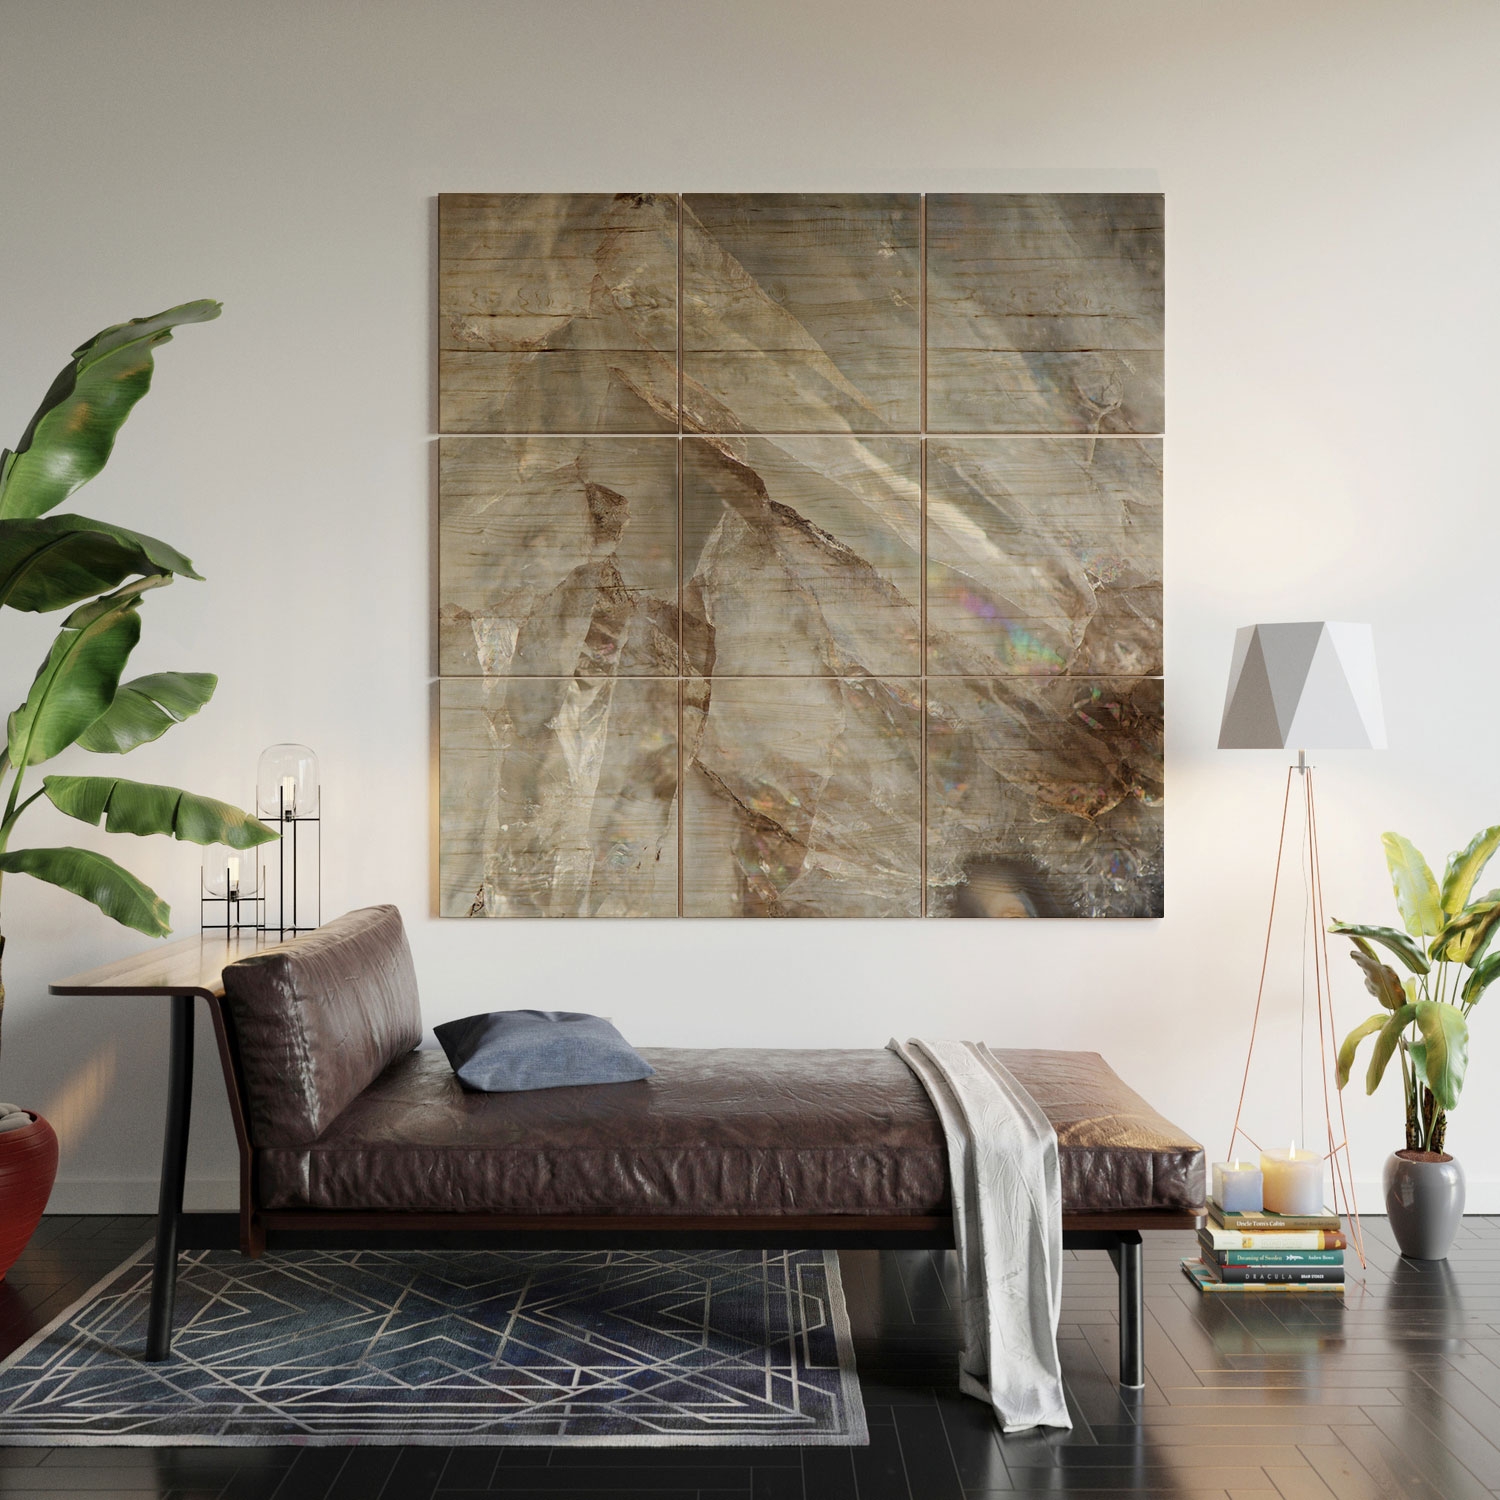 Crystalize by Bree Madden - Wood Wall Mural3' X 3' (Nine 12" Wood Squares) - Image 4